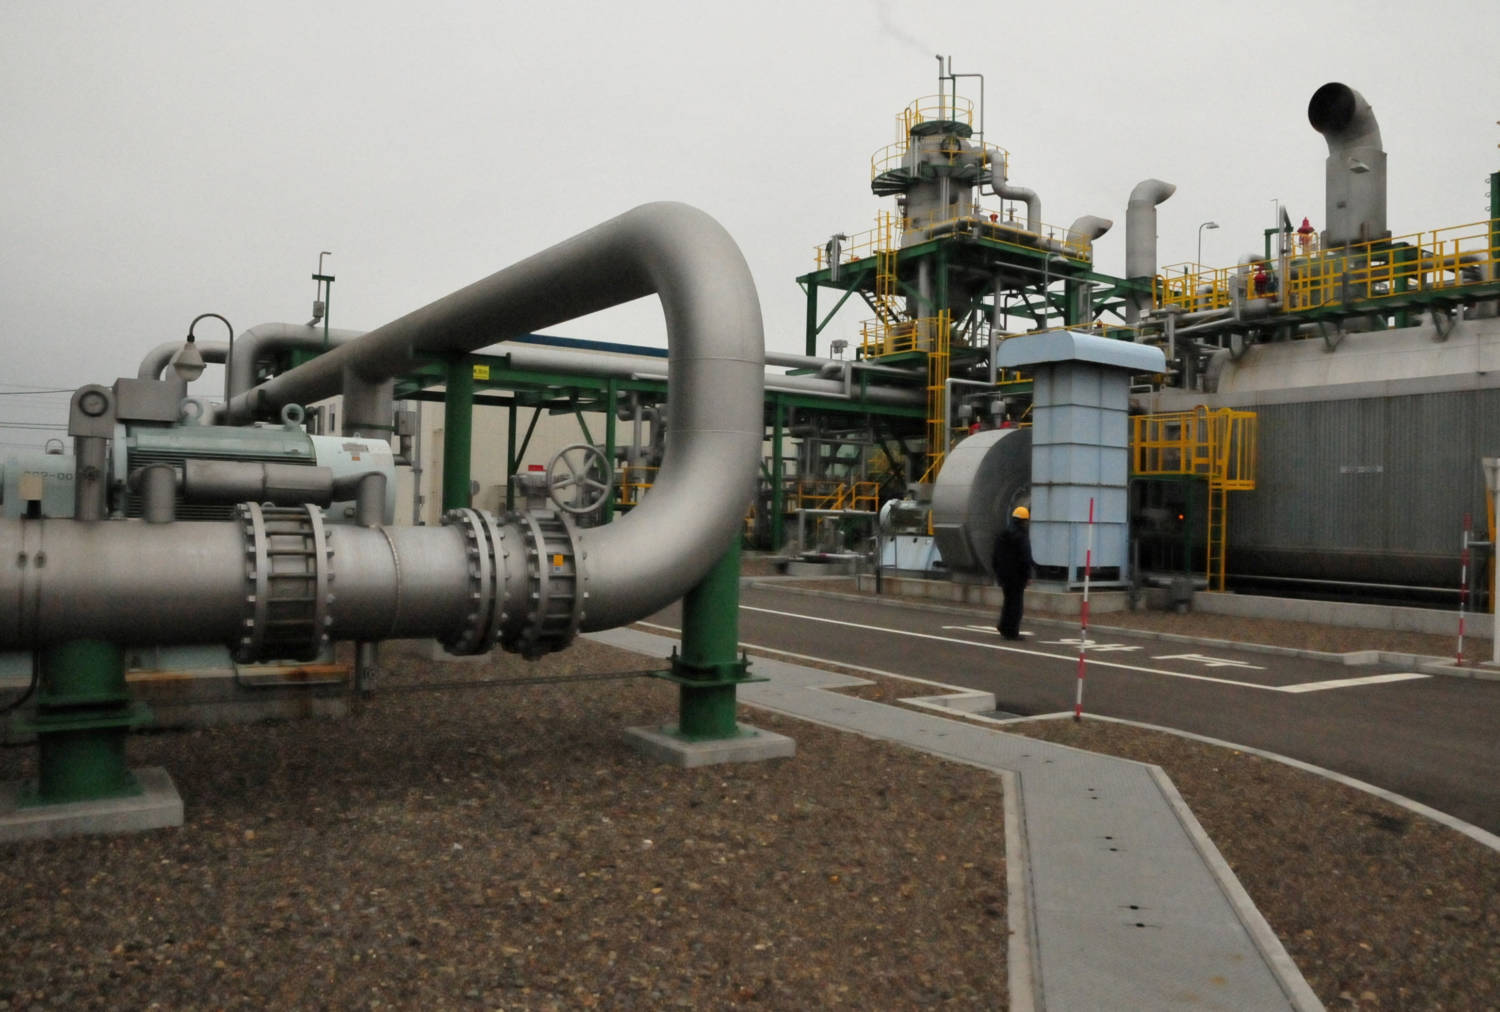 File Photo: Pipe For Tranporting Co2 Pictured At Ccs Test Site In Tomakomai